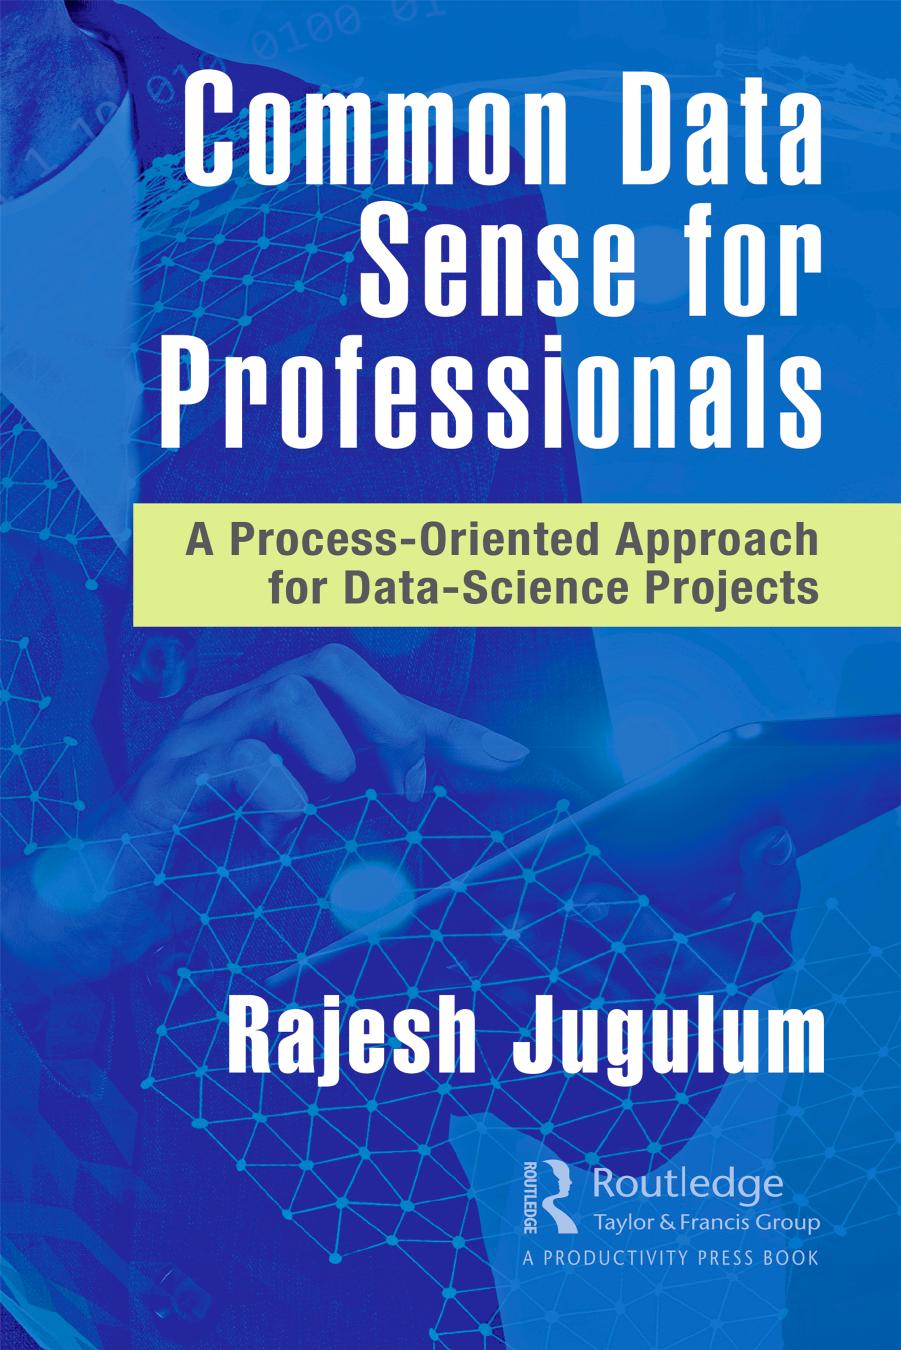 Common Data Sense for Professionals: A Process-Oriented Approach for Data-Science Projects by Rajesh Jugulum